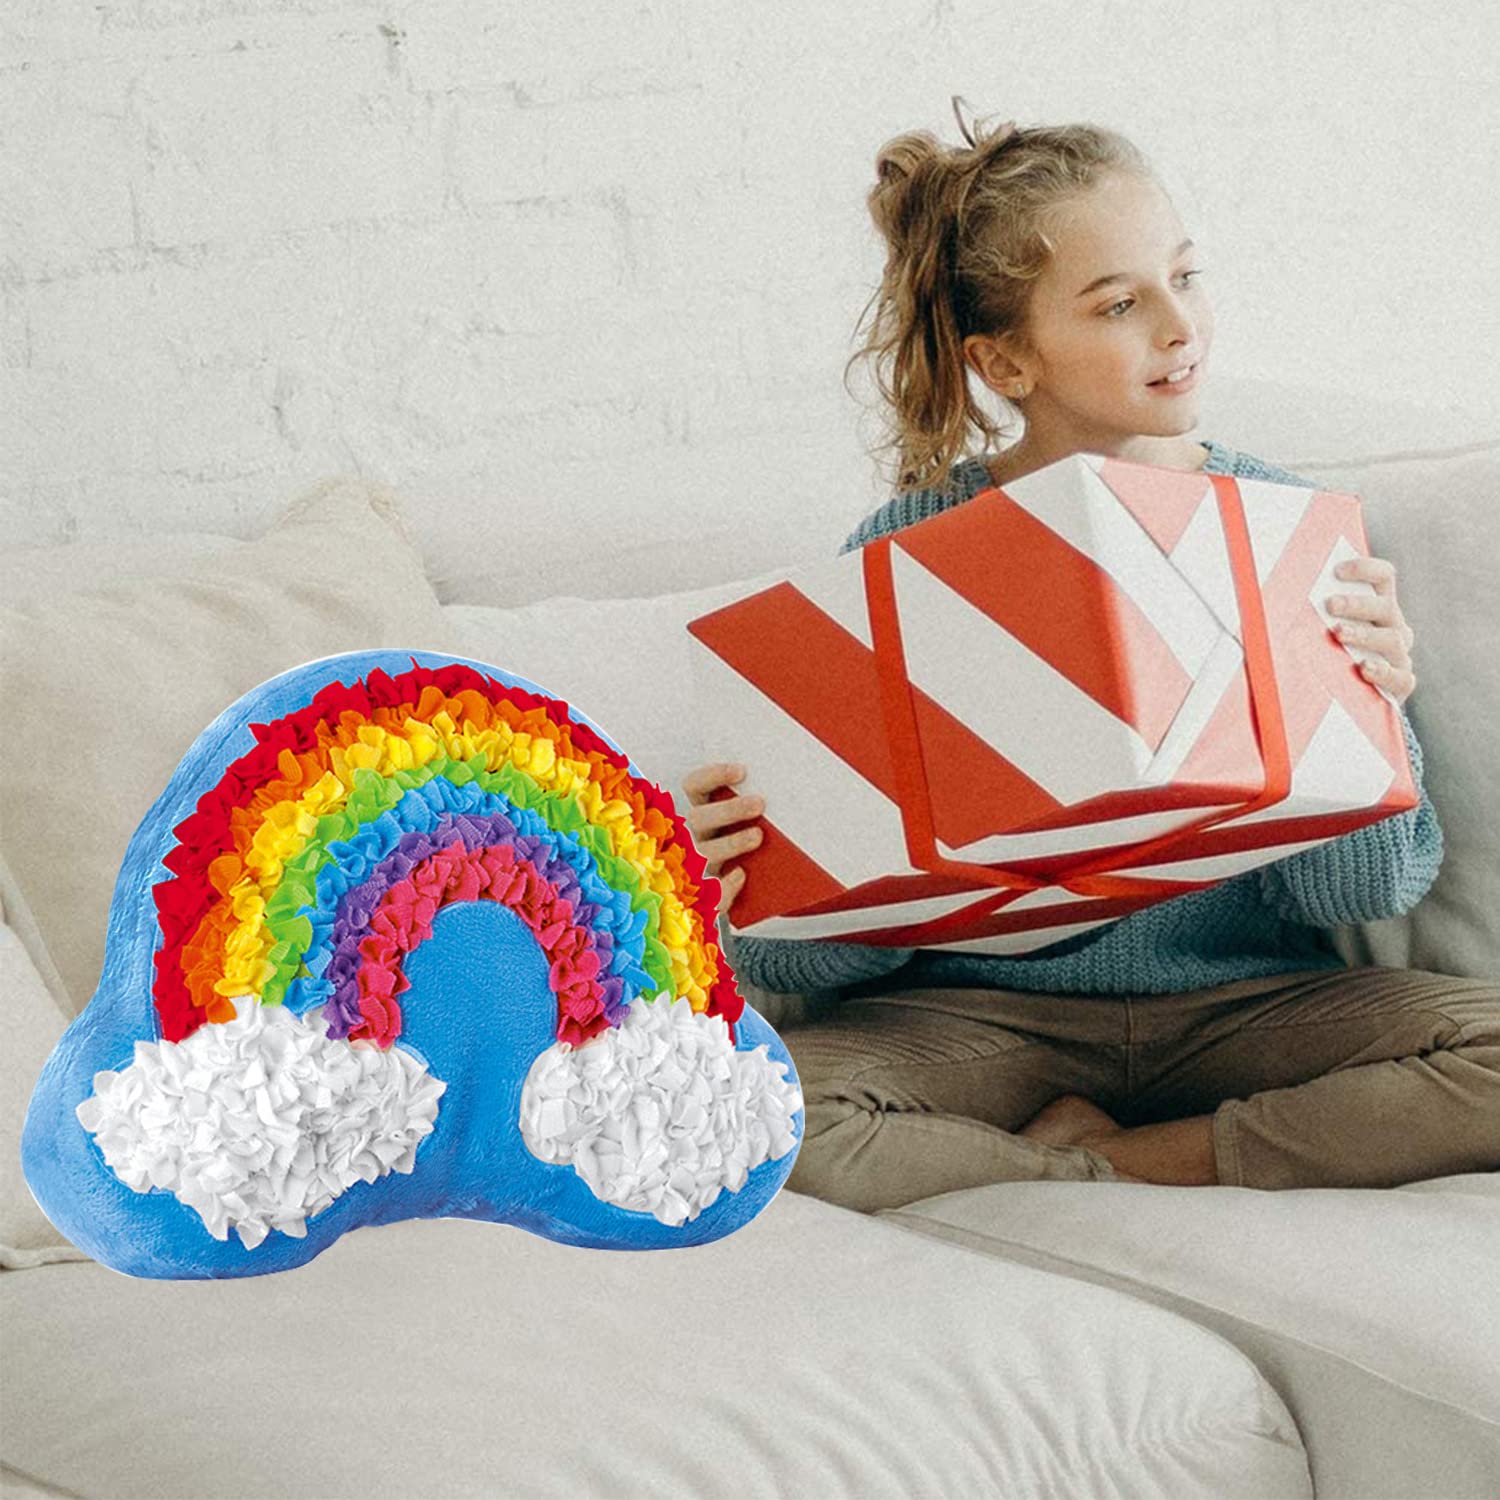 DBlosp Plush Craft Rainbow Pillow, Fabric by Number Art & Crafts, No Sewing, Making Your Own DIY Rainbow Pillow, Kids Project, Learning Fun, Ages 5+